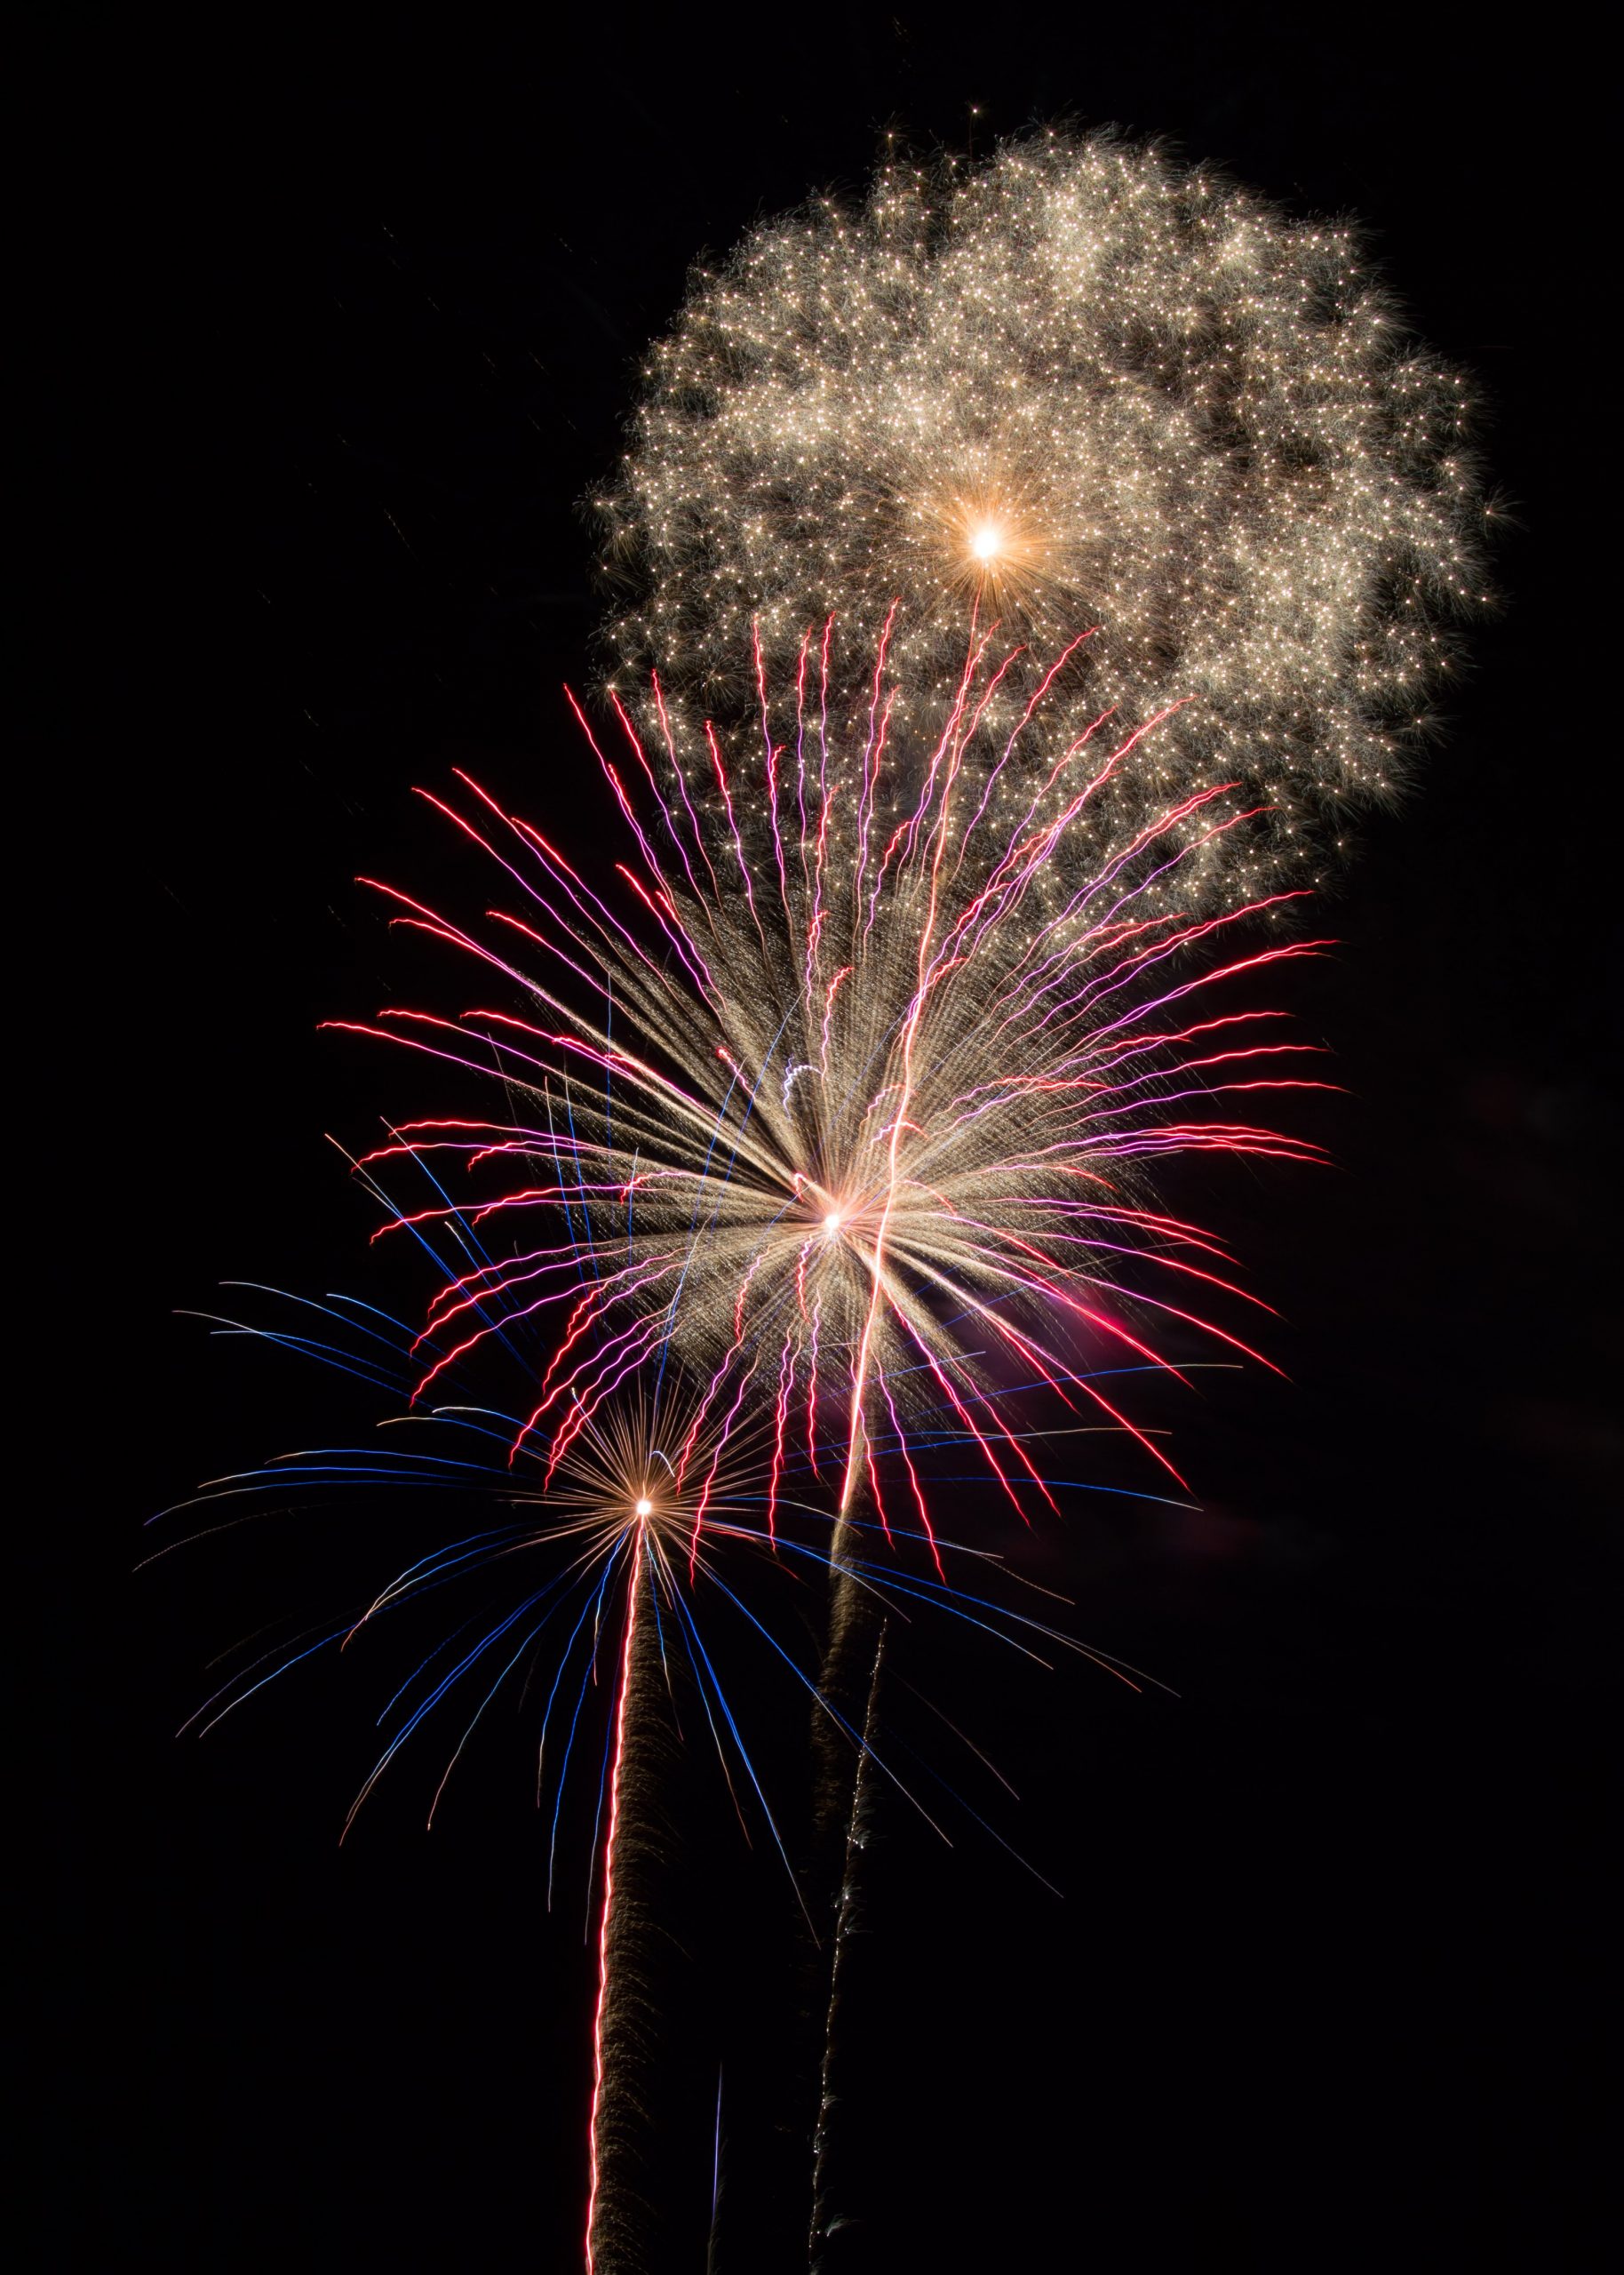 How to deal with the upcoming firework season and general anxiety